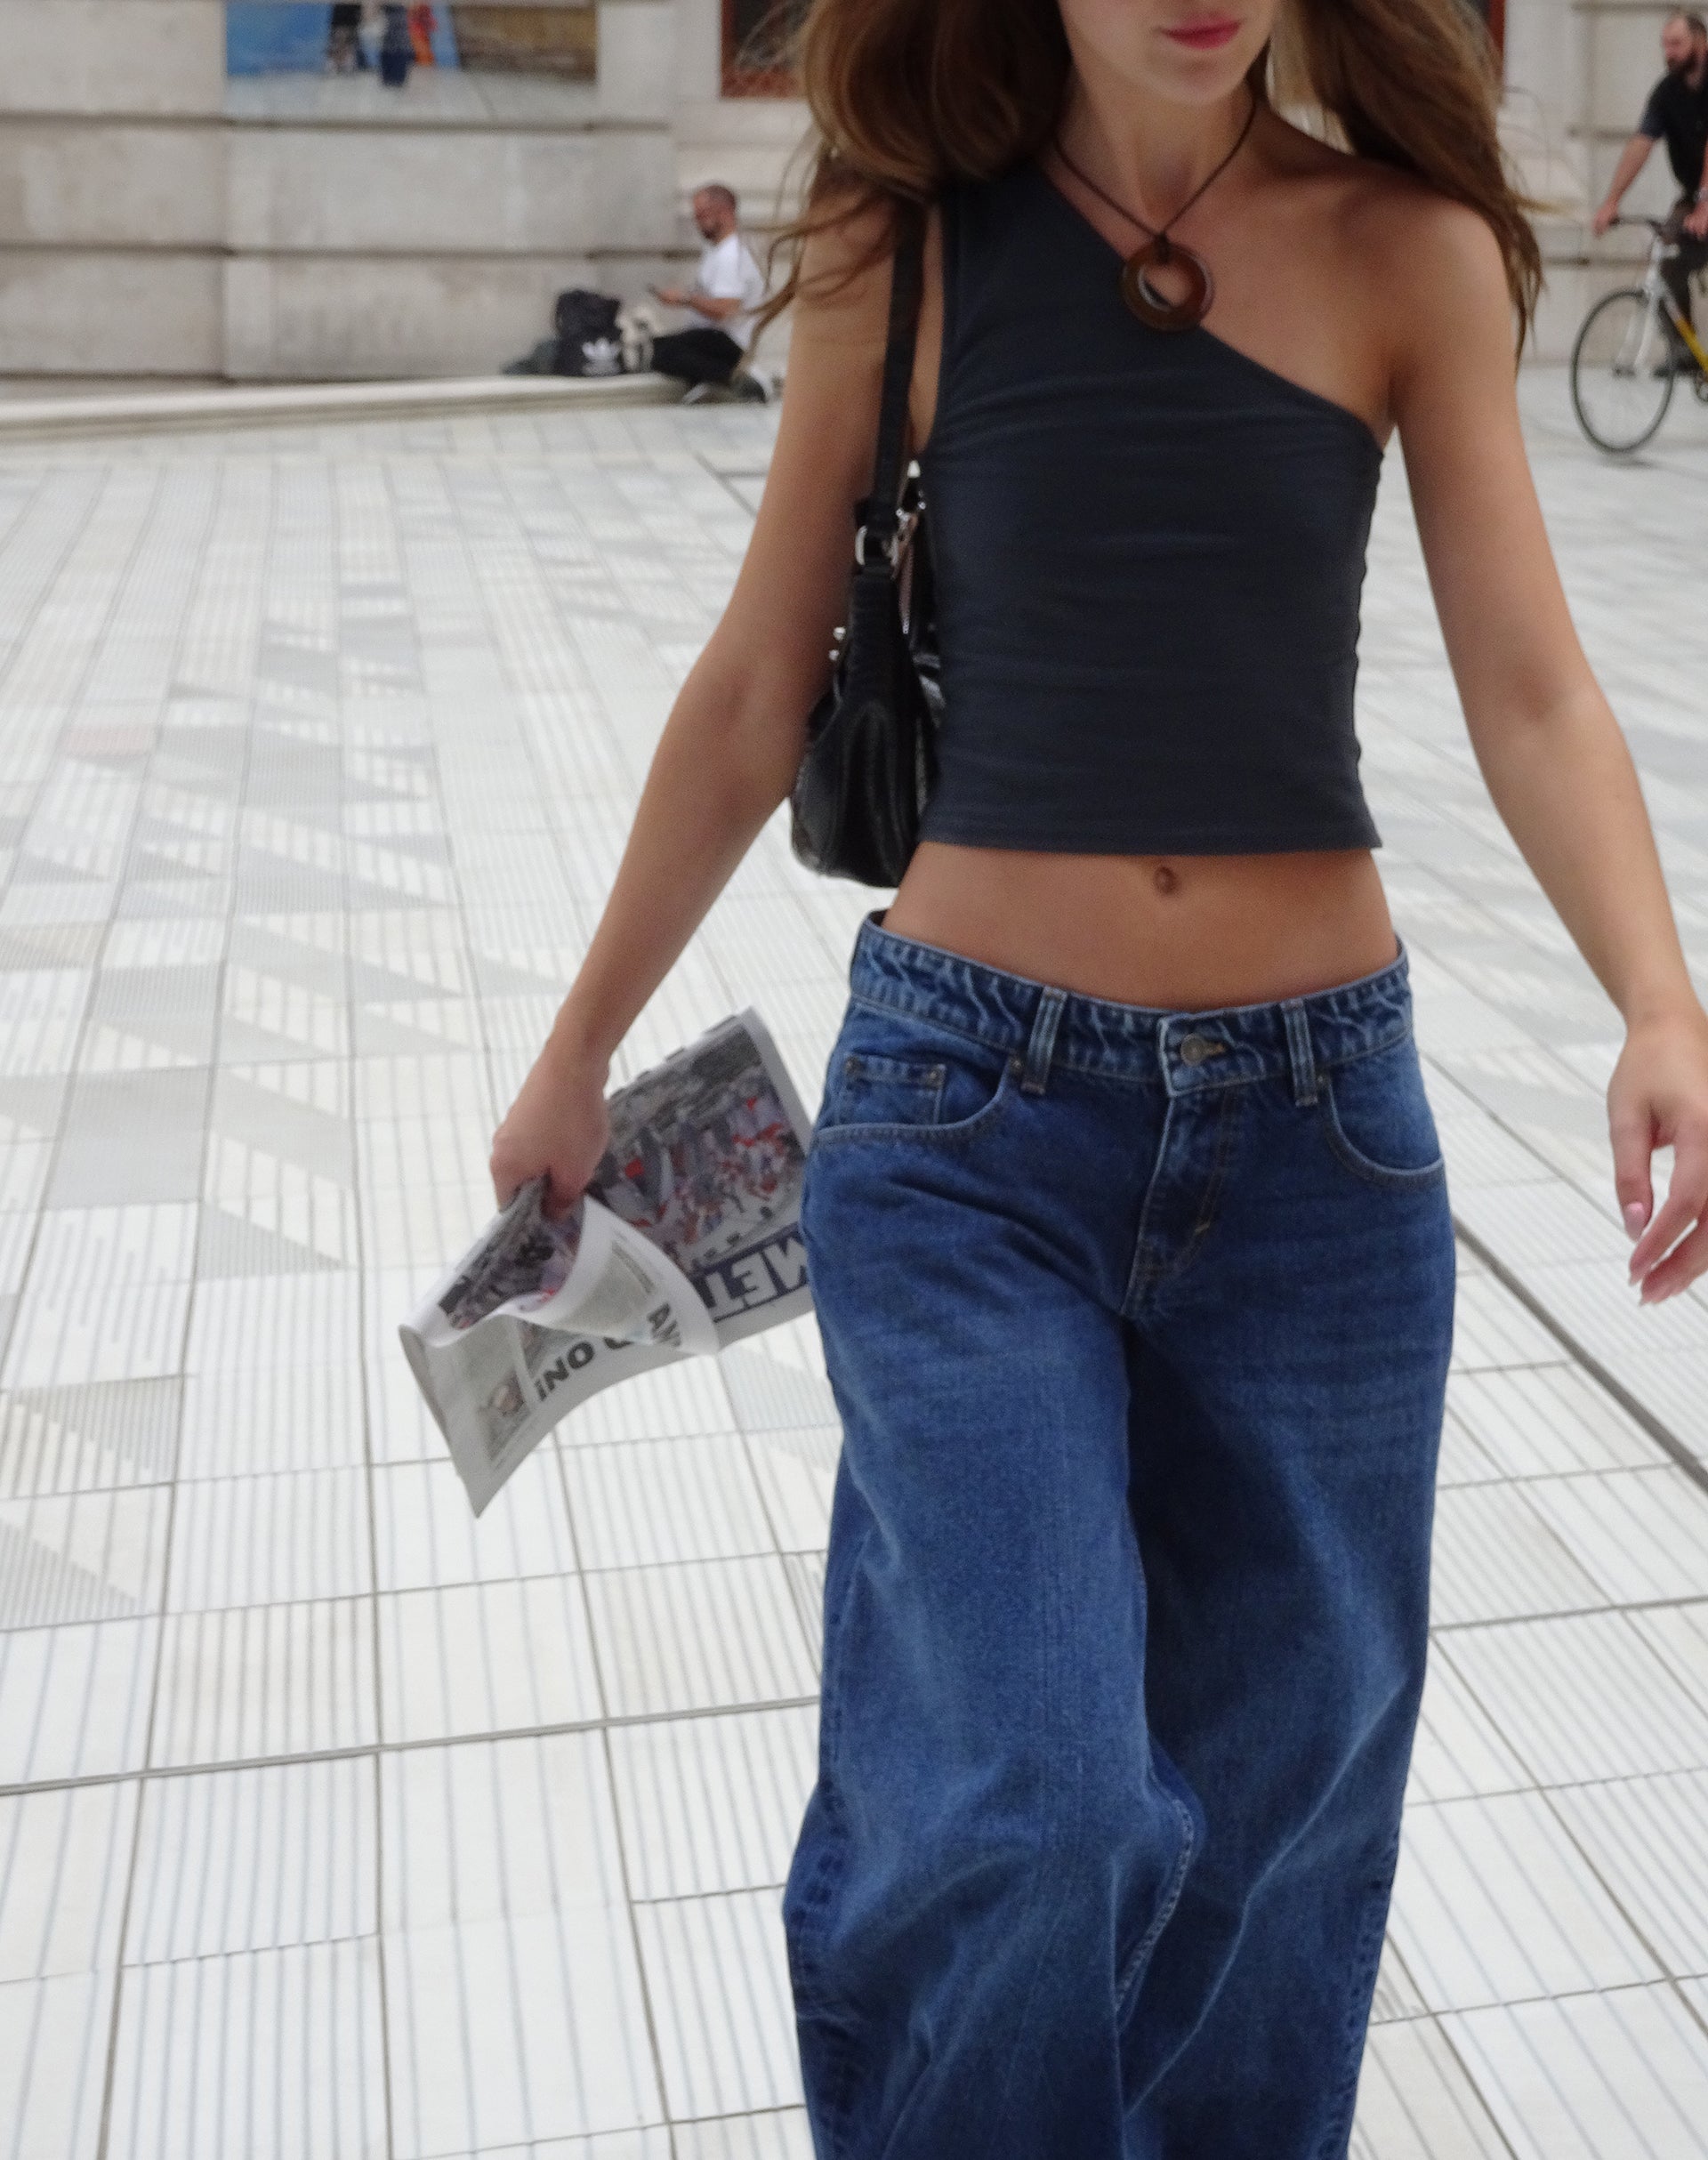 Low-rise jeans are back. Haven't we suffered enough?